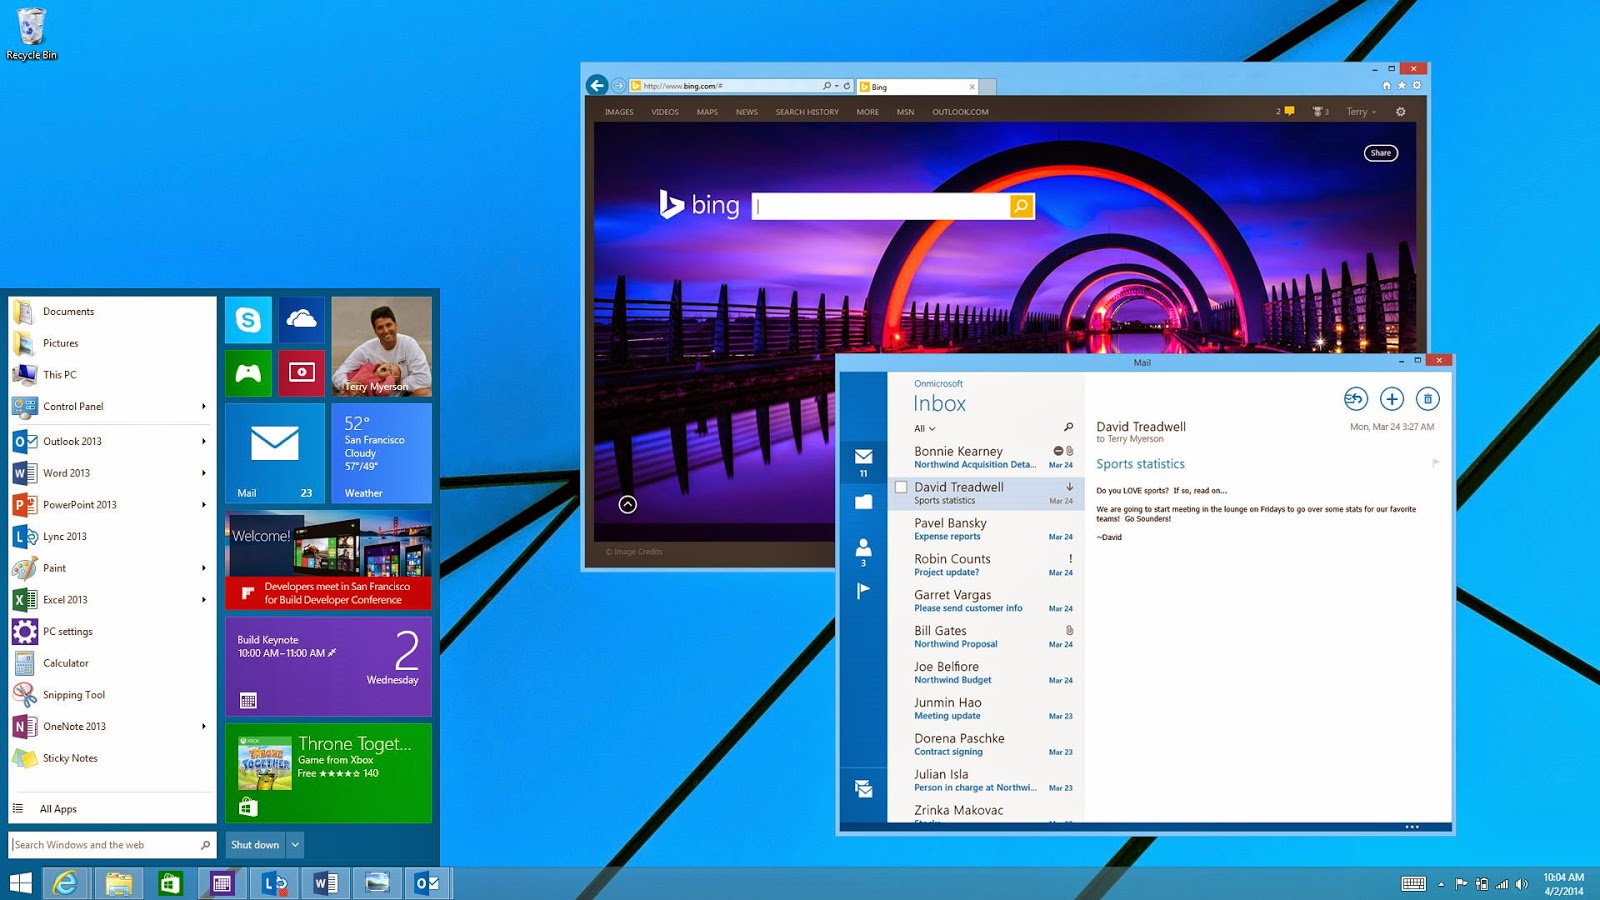 Windows 9 First Look of Feature, Design, Apps